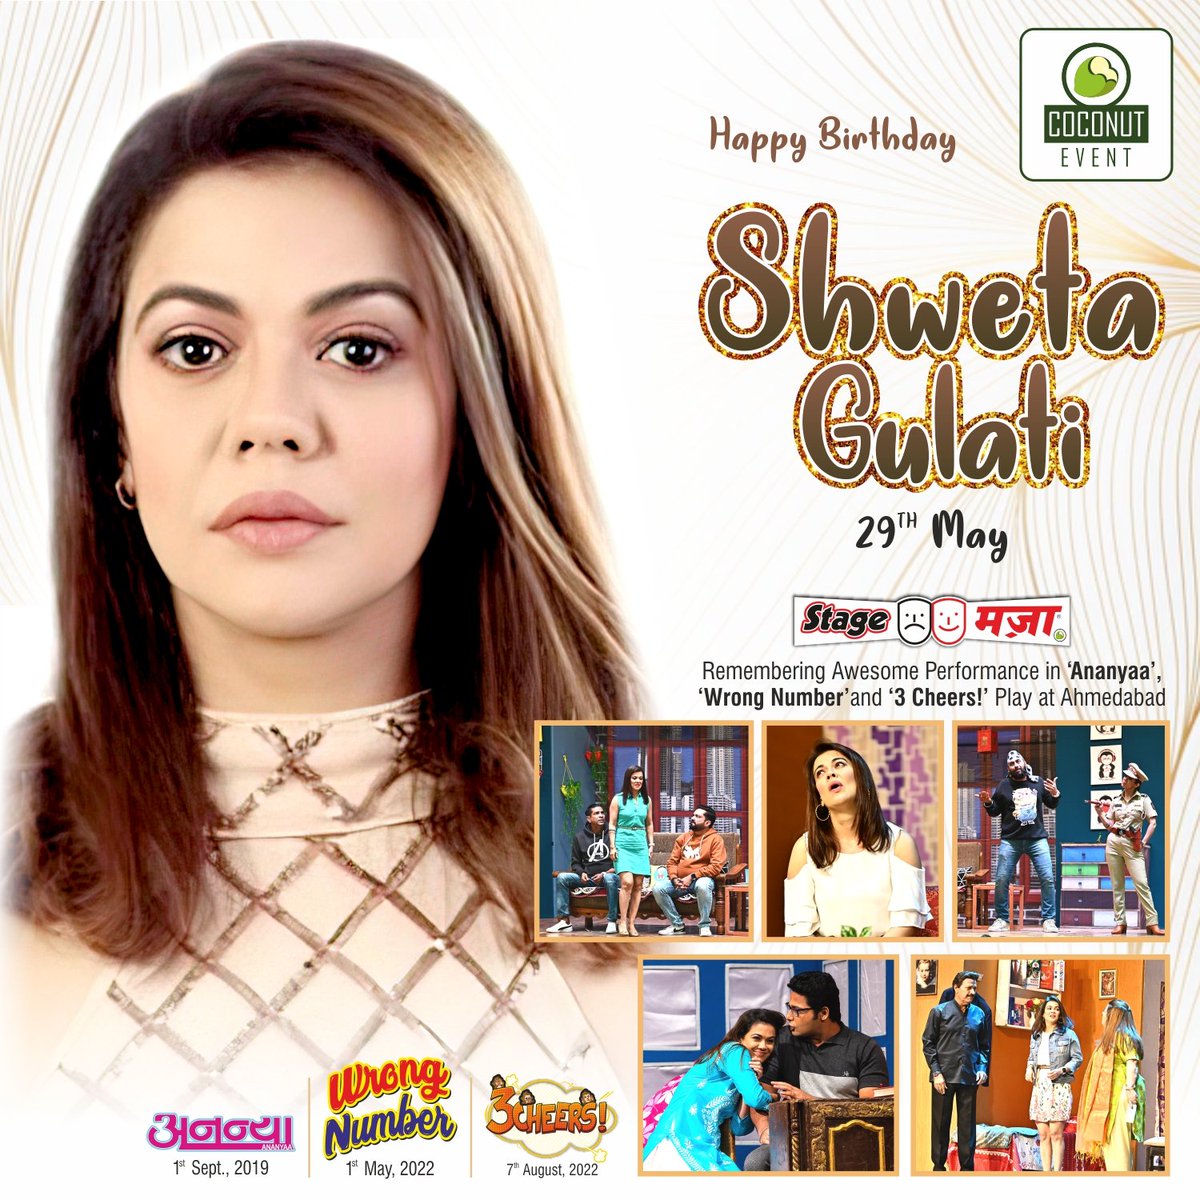 Wishing a #HappyBirthday to #ShwetaGulati May your day be filled with the same joy and excitement you bring to everyone. With heartfelt wishes from #CoconutEvent and #StageMazaa

#BirthdayWishes #RashminMajithia #Actress #HBD #BDay #HappyBirthdayToYou